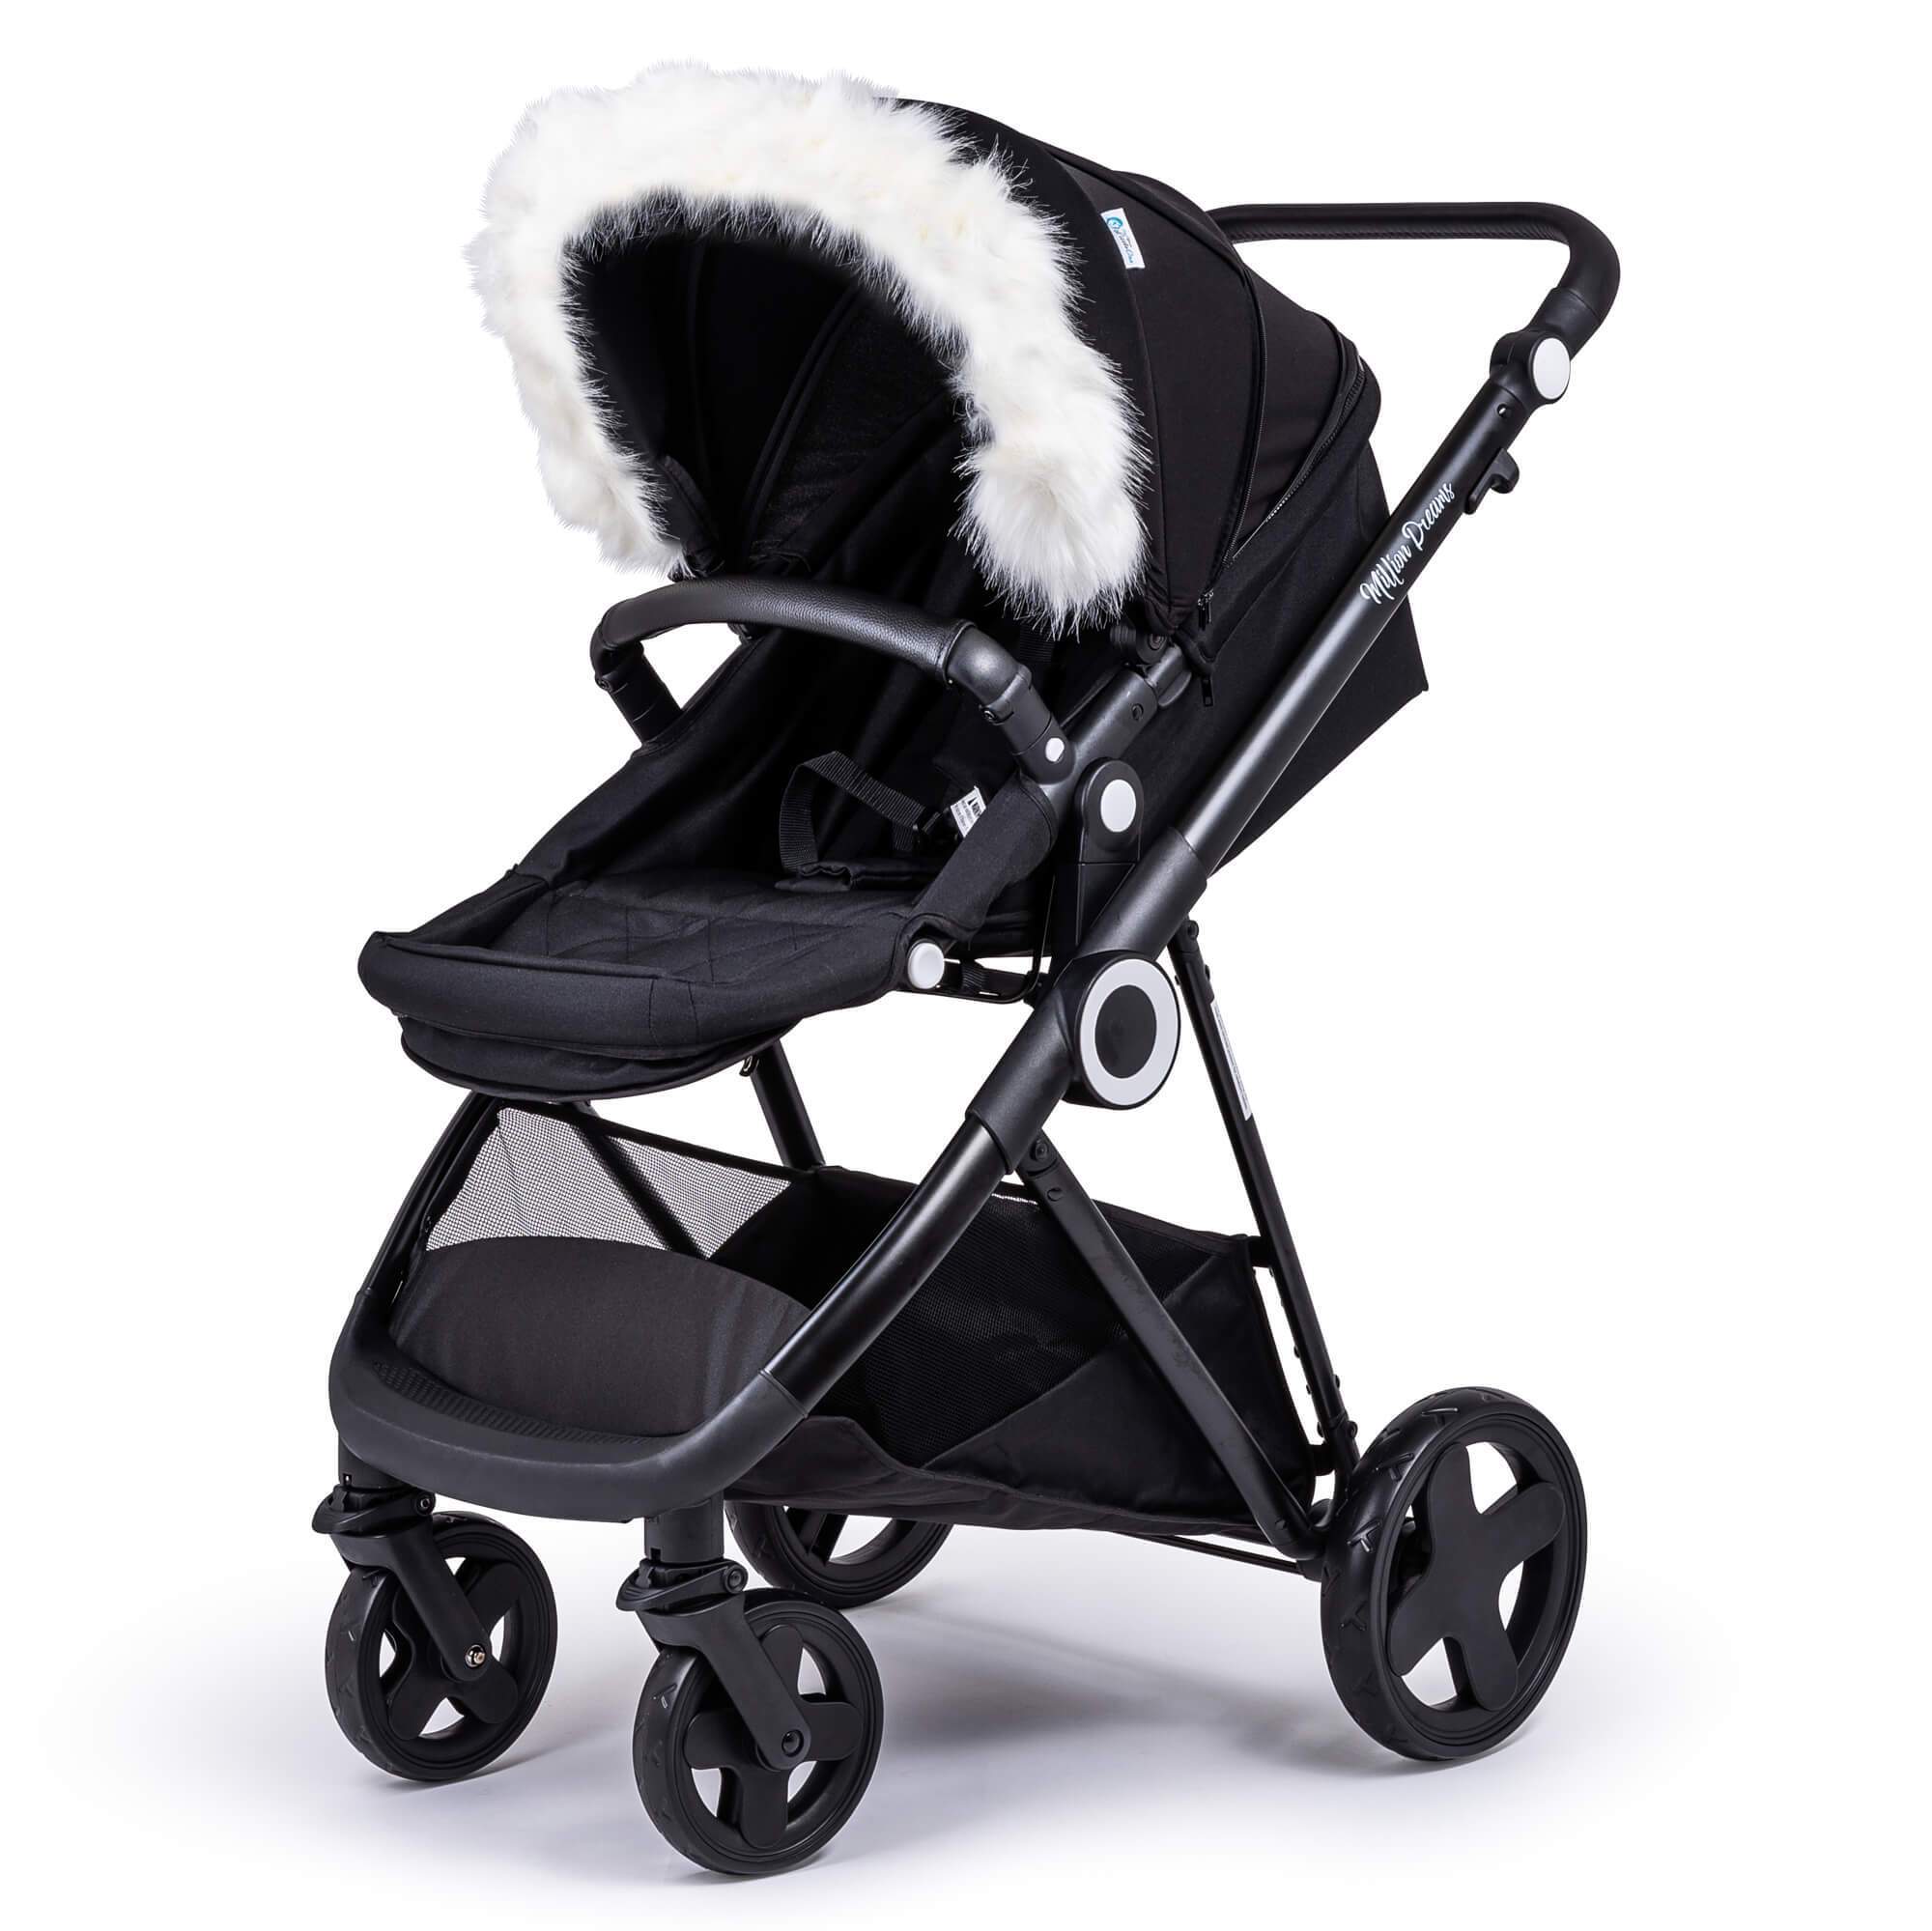 Pram Fur Hood Trim Attachment for Pushchair Compatible with Firstwheels - For Your Little One